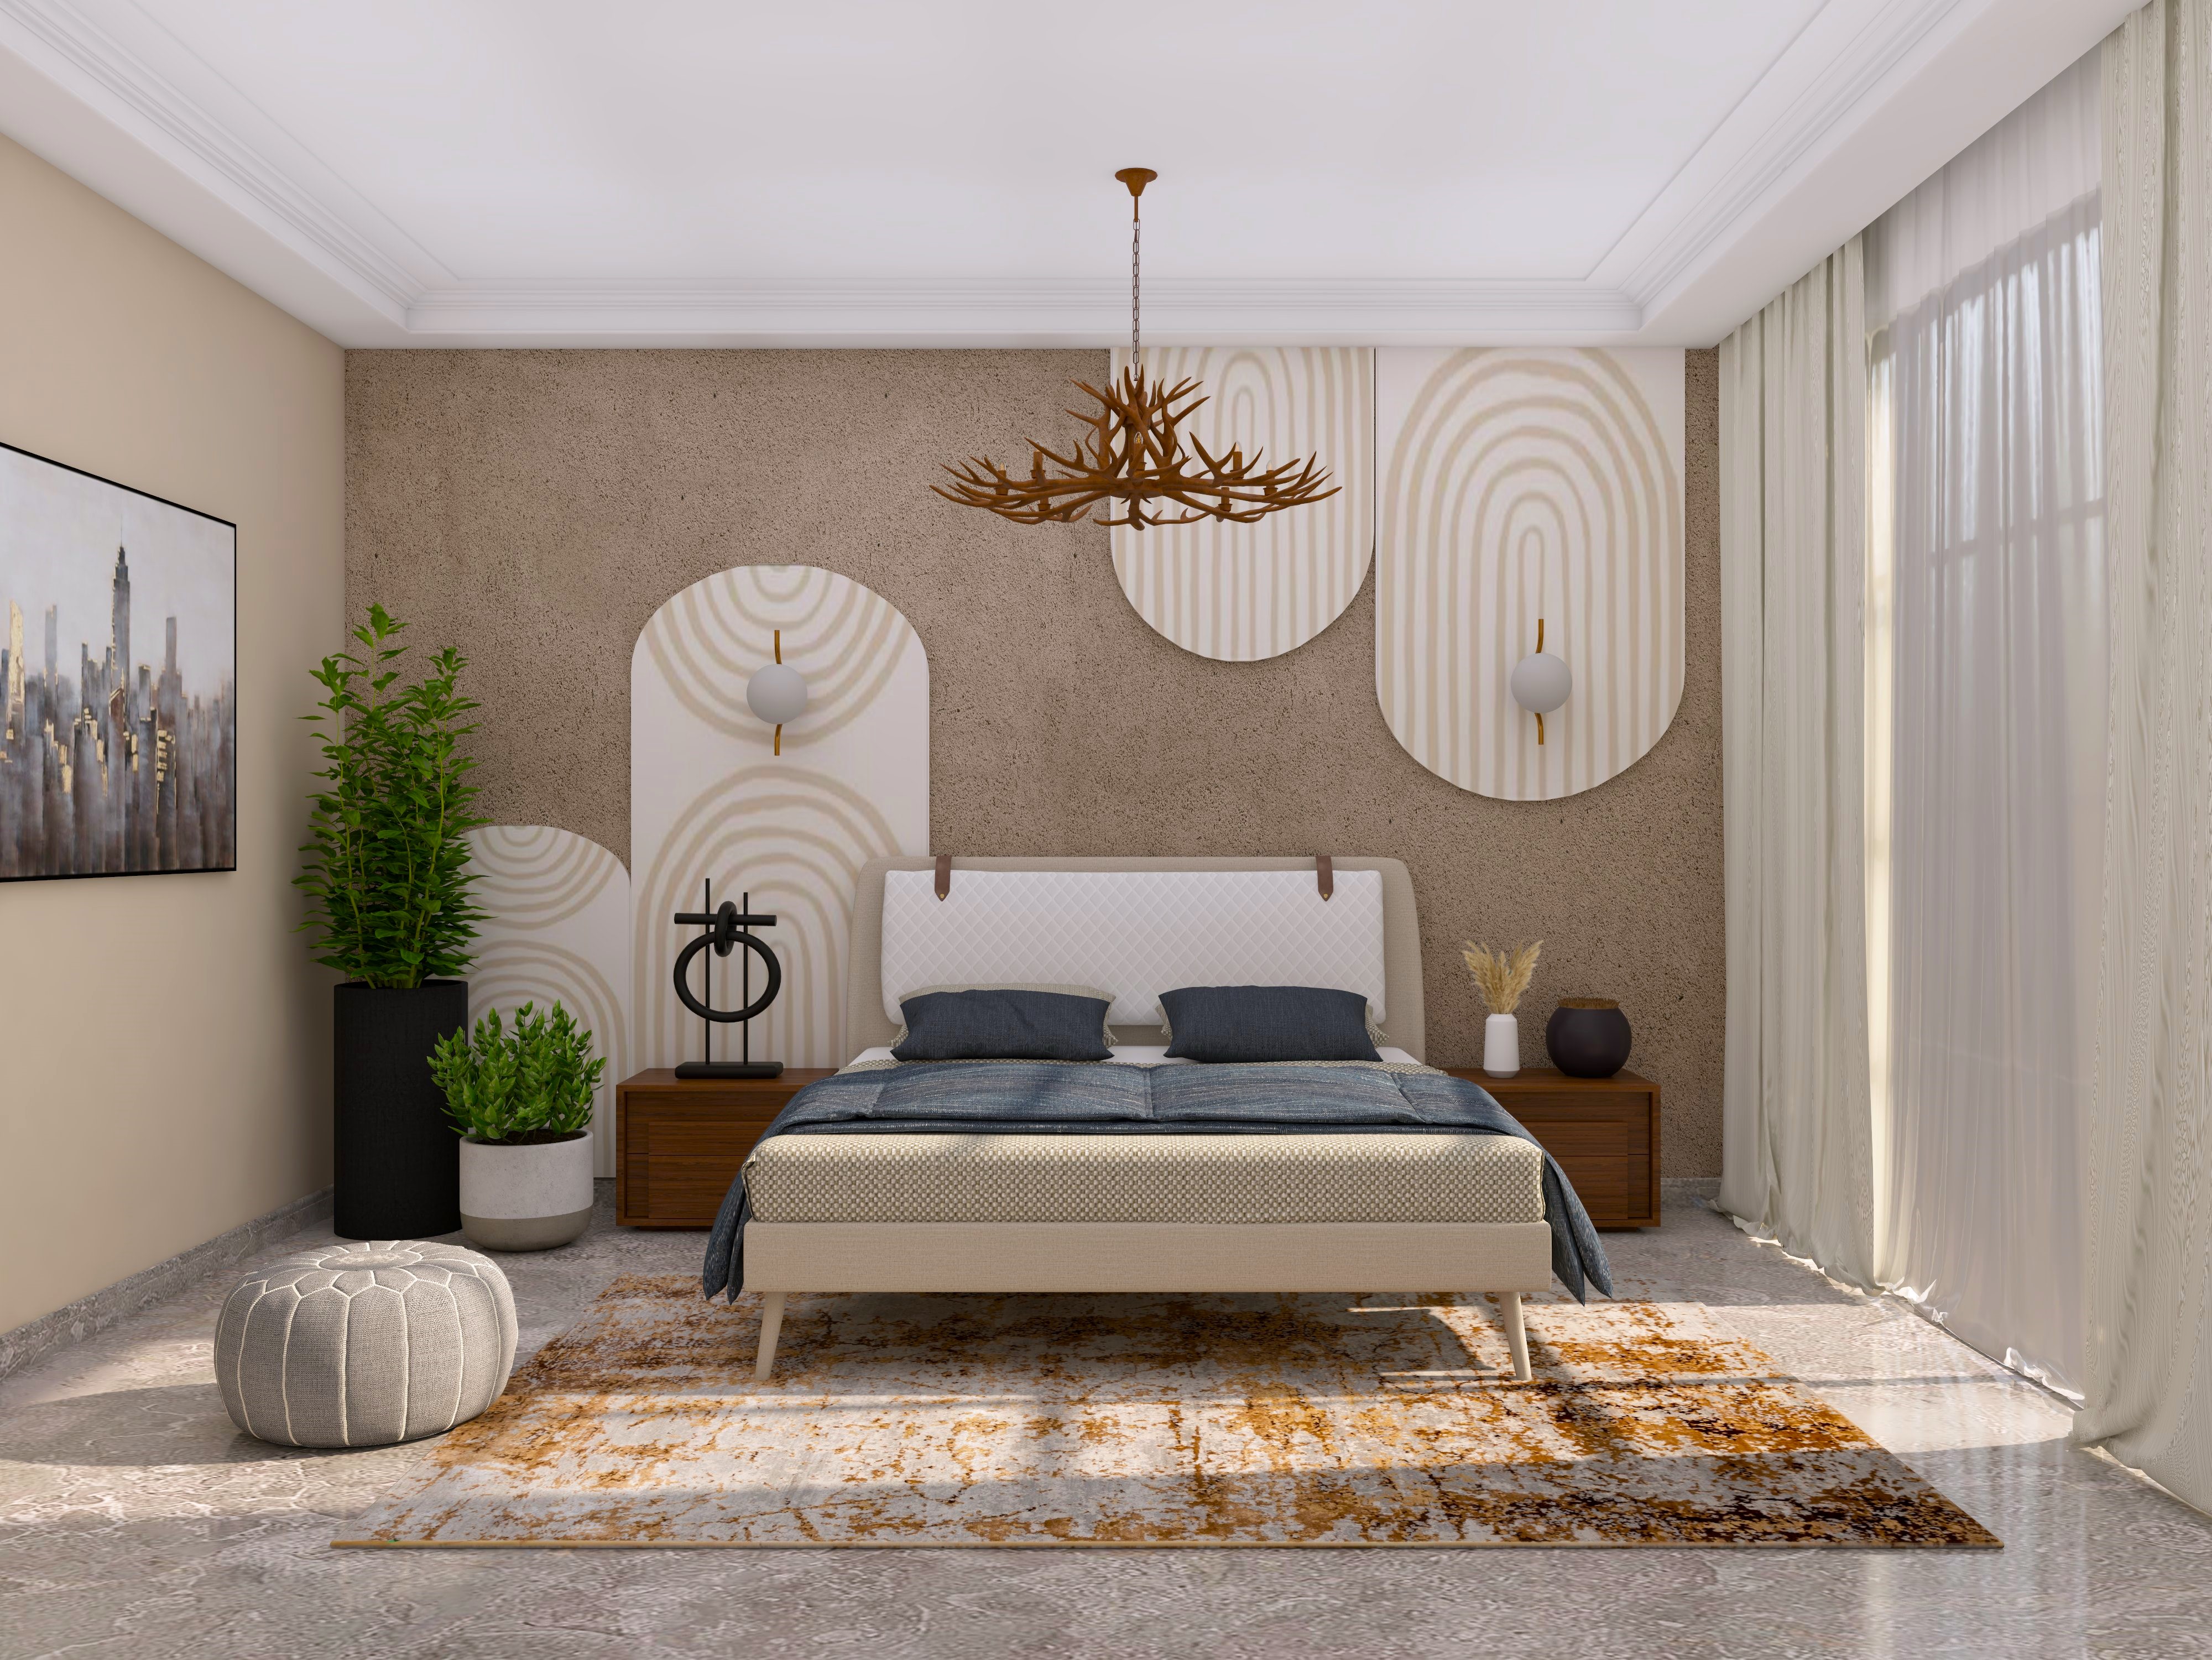 Eclectic style bedroom with wooden side tables and white teak lights - Beautiful Homes